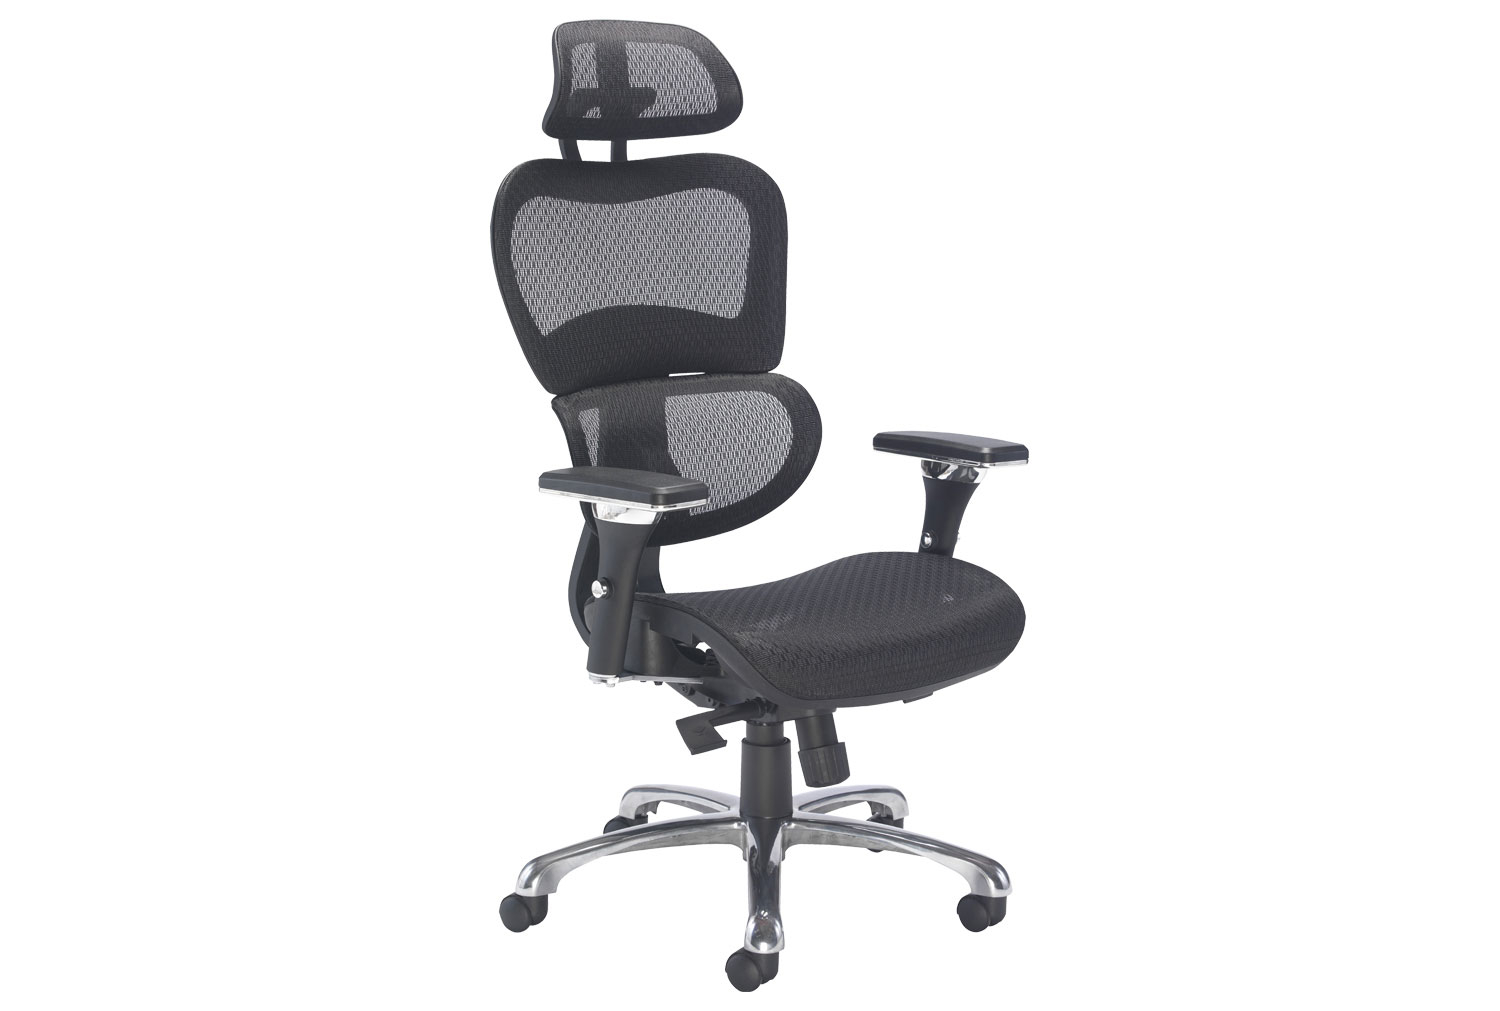 Coben Executive Mesh Back Office Chair, Black, Fully Installed